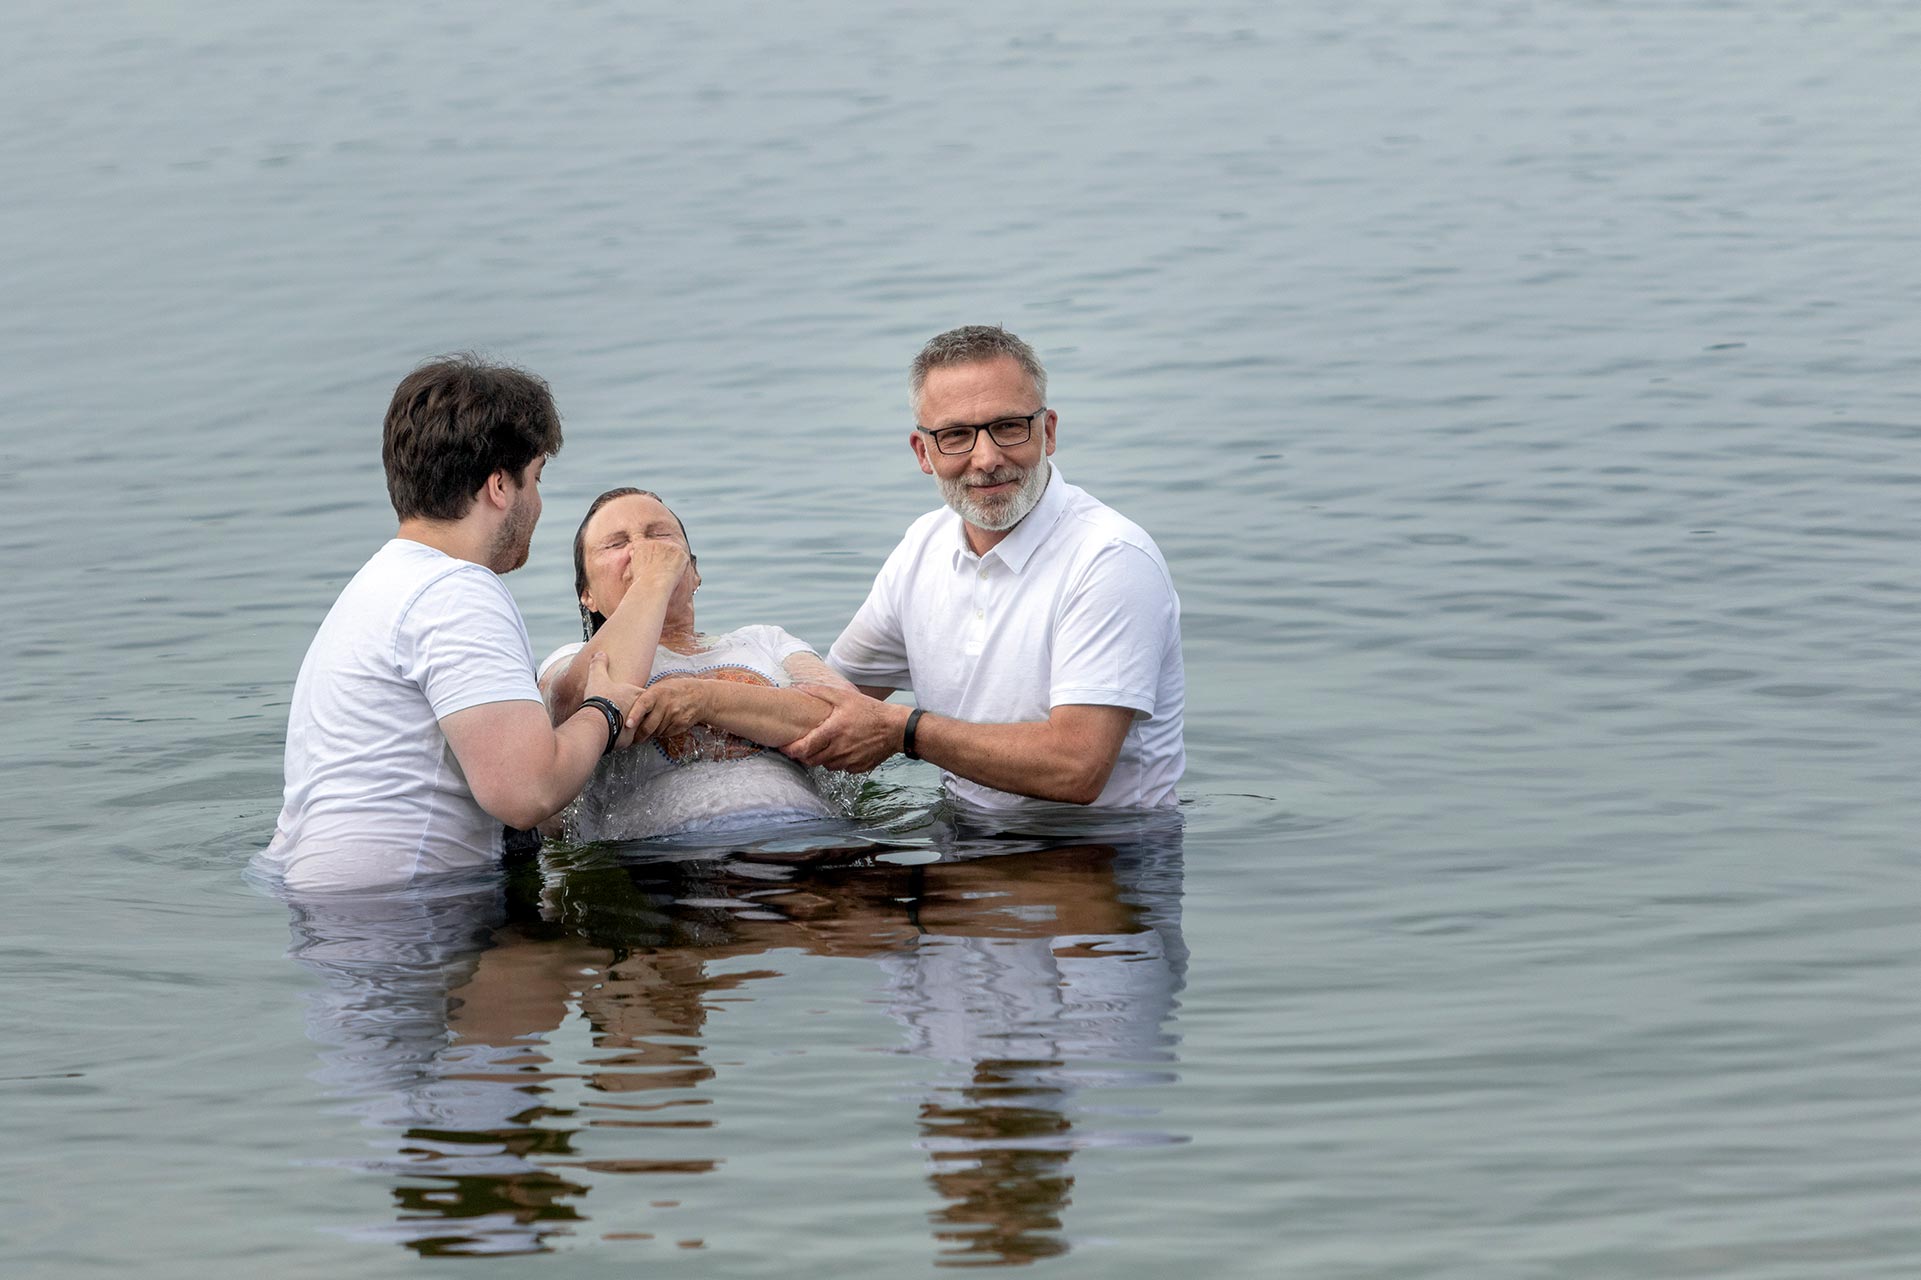 A missionary baptizing new converts to Christianity